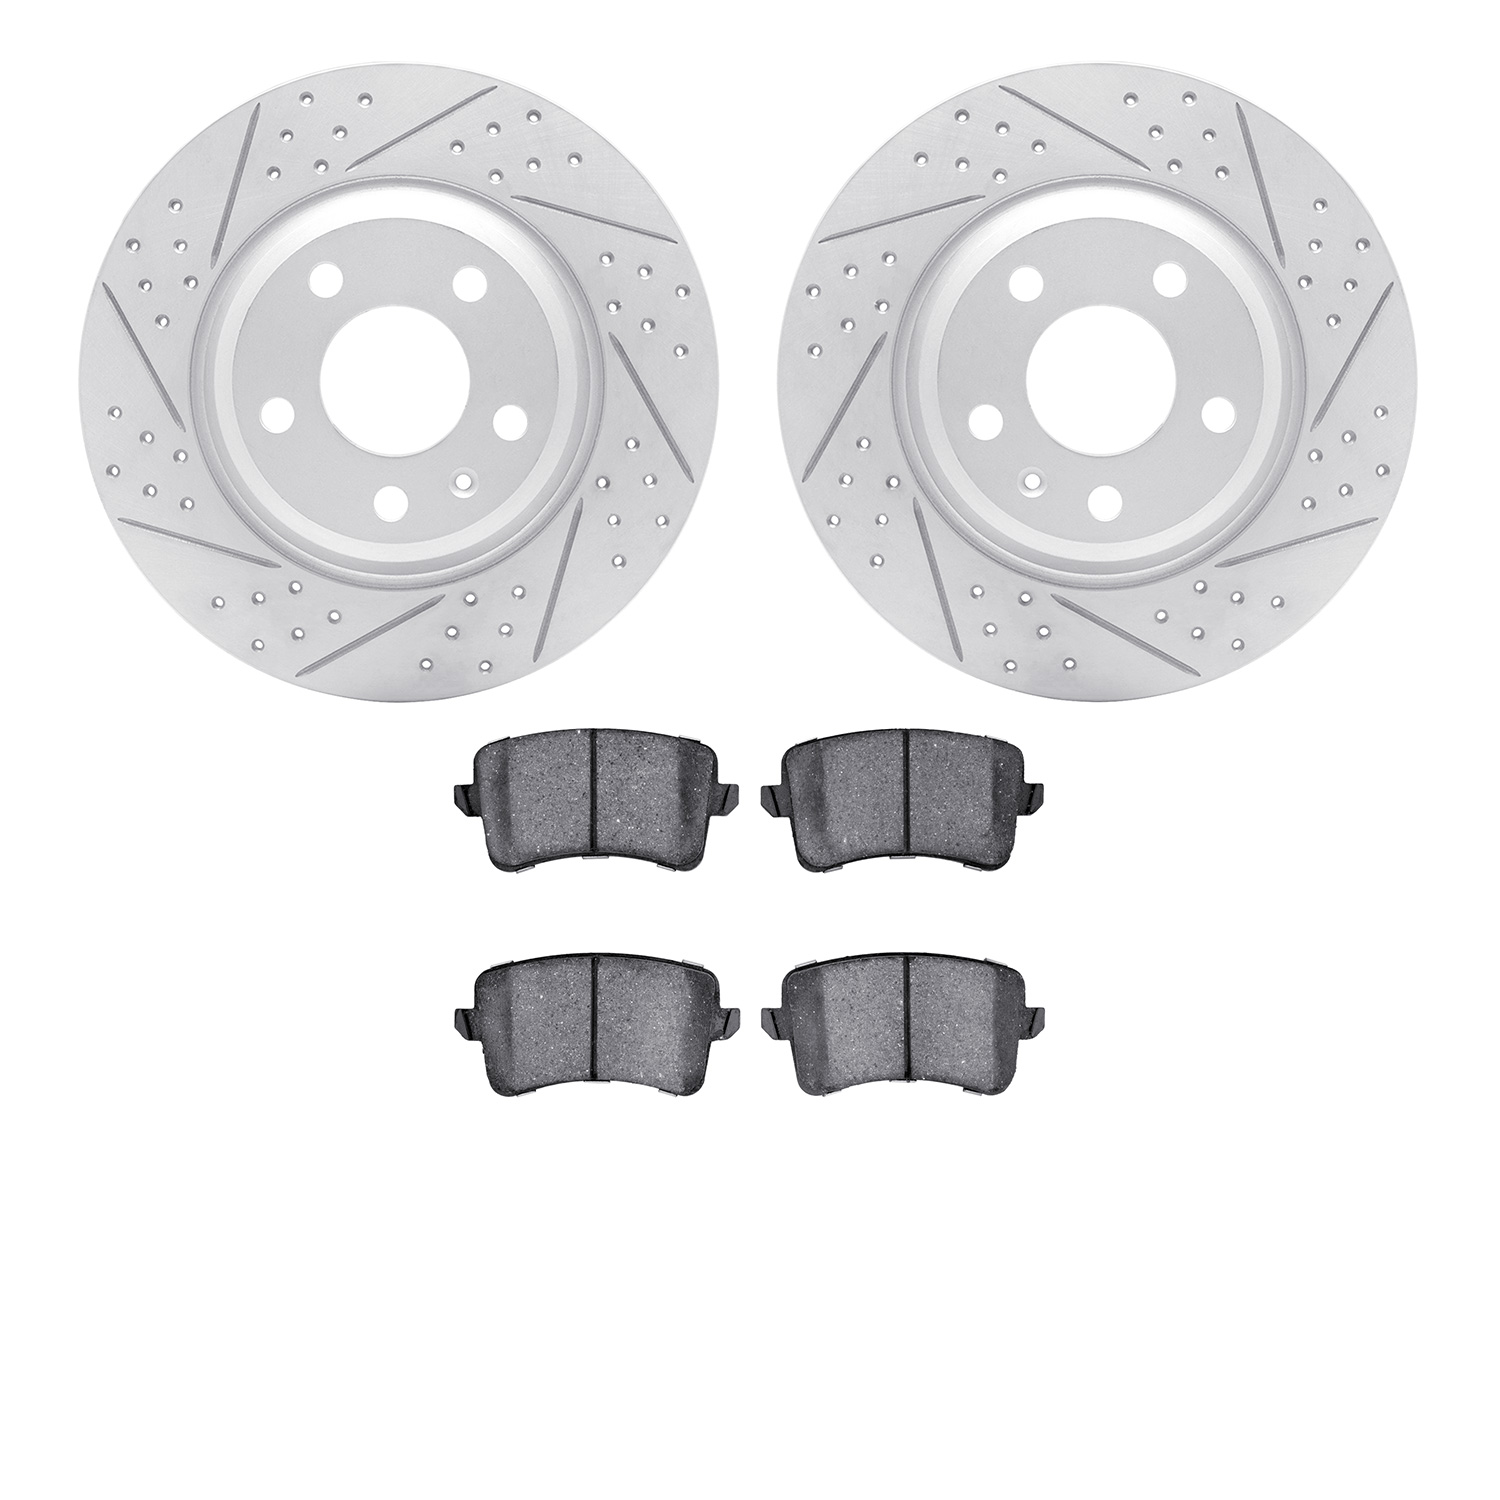 2502-73057 Geoperformance Drilled/Slotted Rotors w/5000 Advanced Brake Pads Kit, 2008-2016 Audi/Volkswagen, Position: Rear